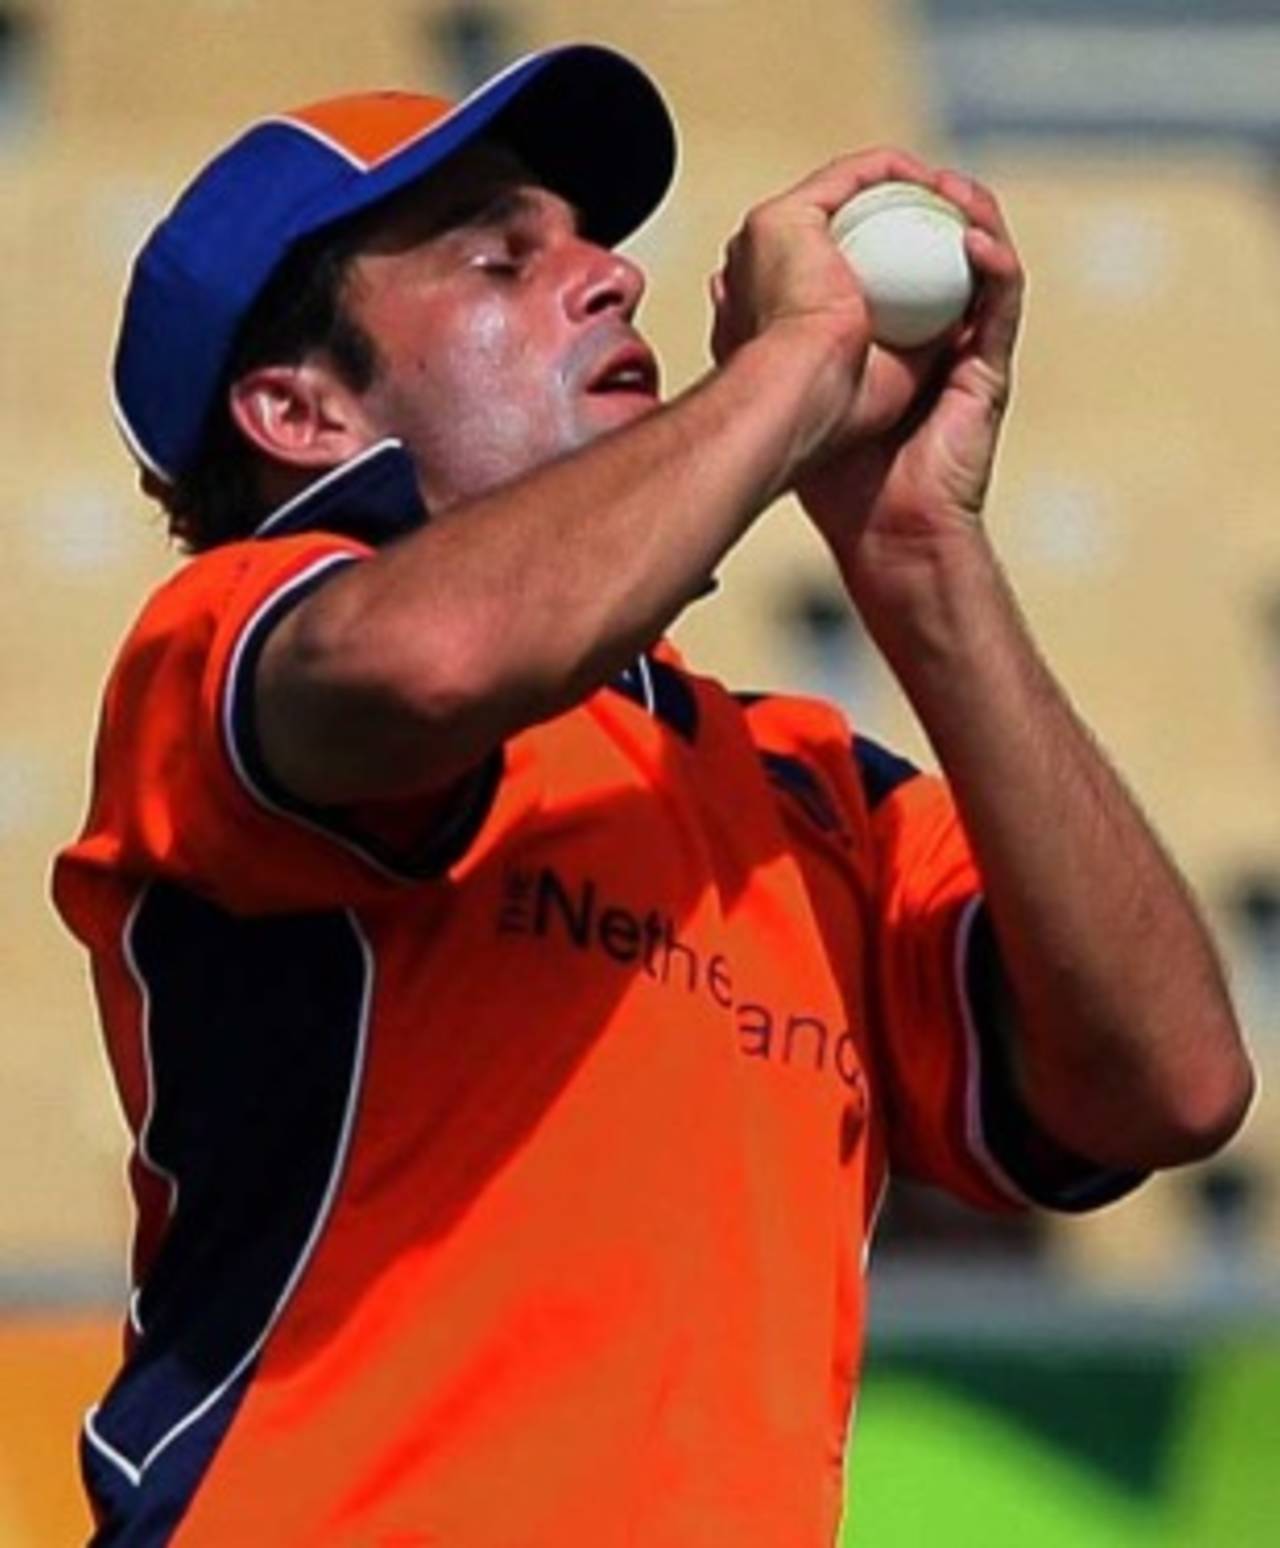 Peter Borren takes a catch to dismiss Matthew Hayden for 29 off Tim de Leede's bowling, Australia v Netherlands, Group A, St Kitts, March 18, 2007